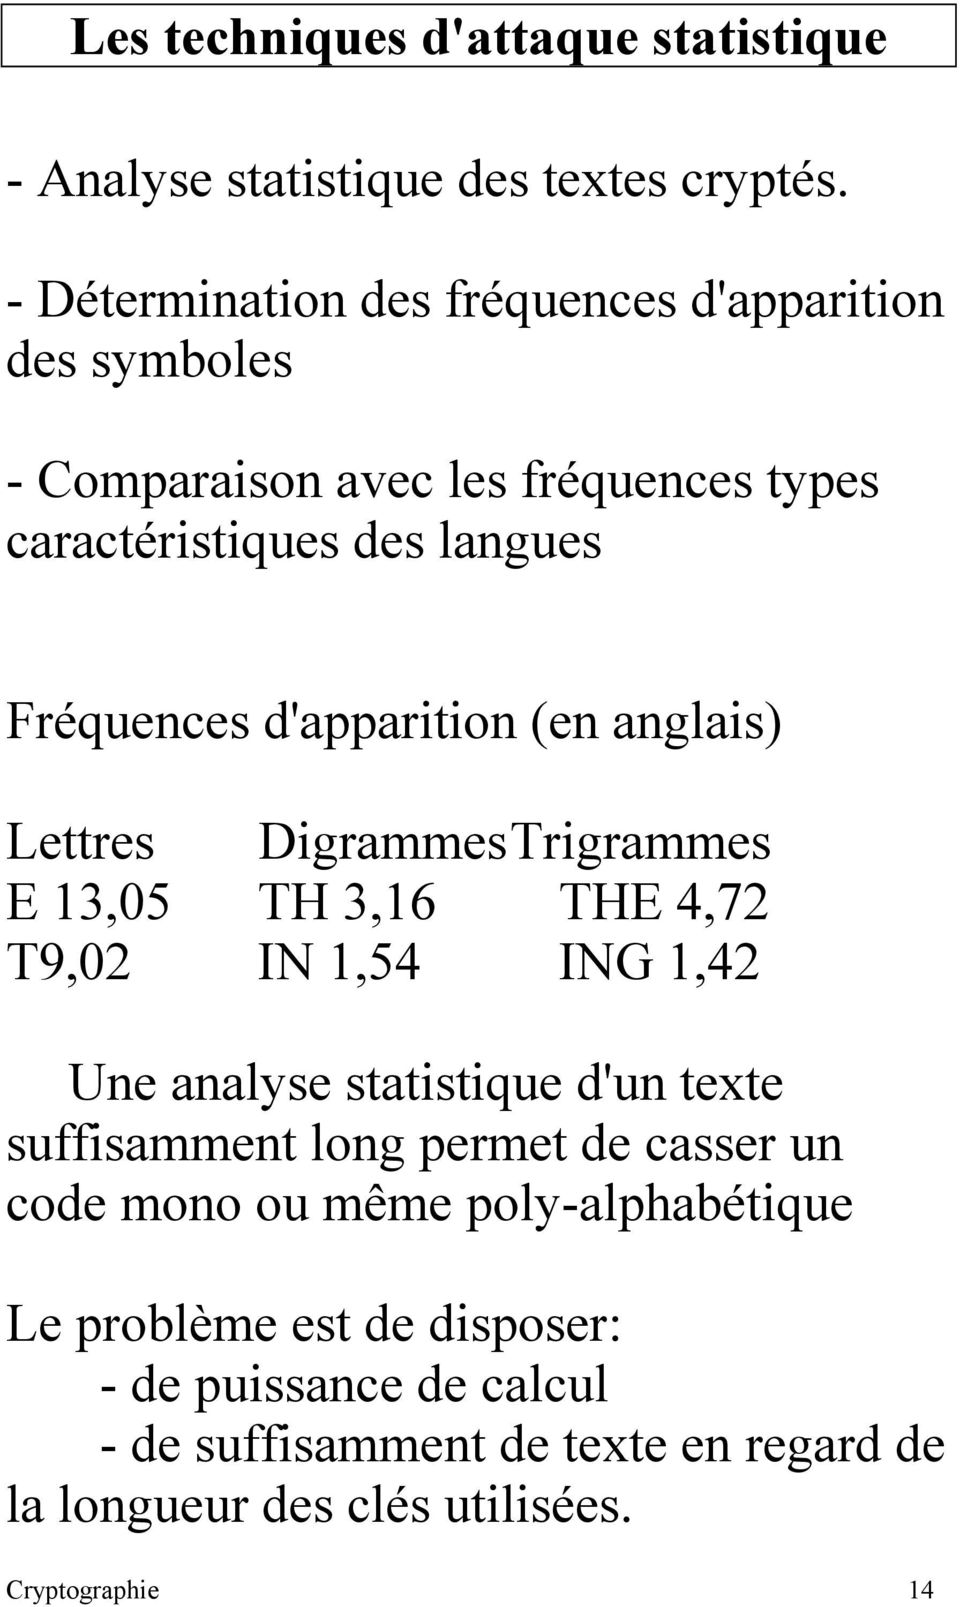 d'apparition (en anglais) Lettres DigrammesTrigrammes E 13,05 TH 3,16 THE 4,72 T9,02 IN 1,54 ING 1,42 Une analyse statistique d'un texte